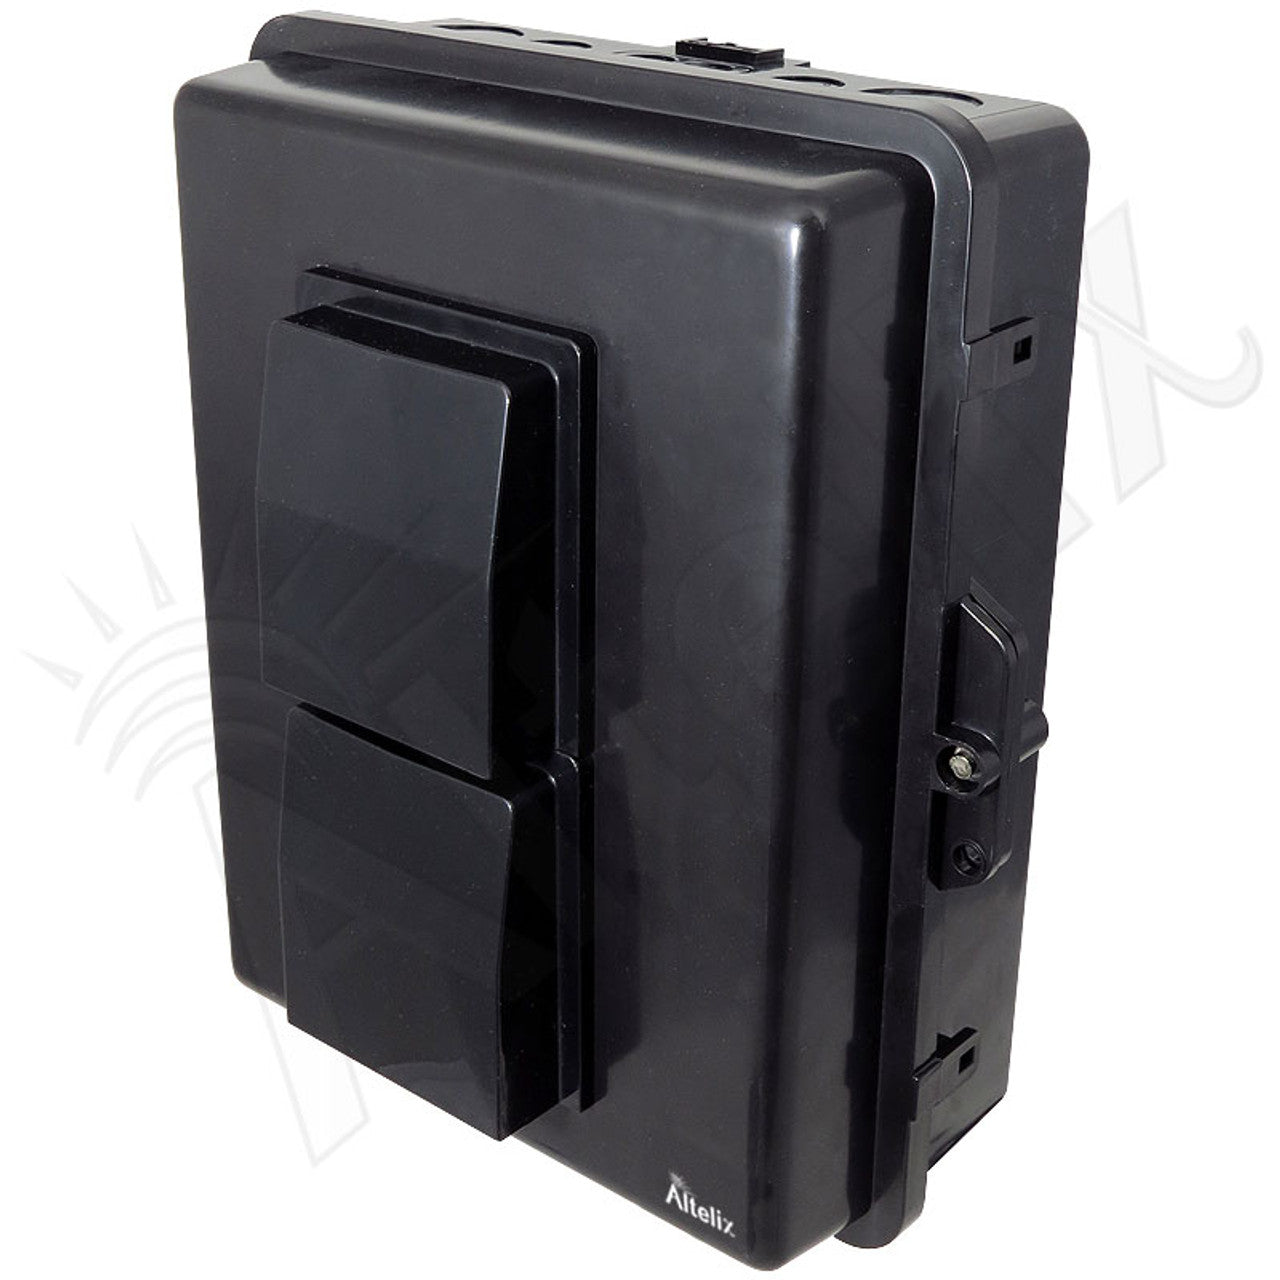 Buy black Altelix 14x11x5 Polycarbonate + ABS Vented Weatherproof NEMA Enclosure with Aluminum Mounting Plate, 120 VAC GFCI Outlets &amp; Power Cord